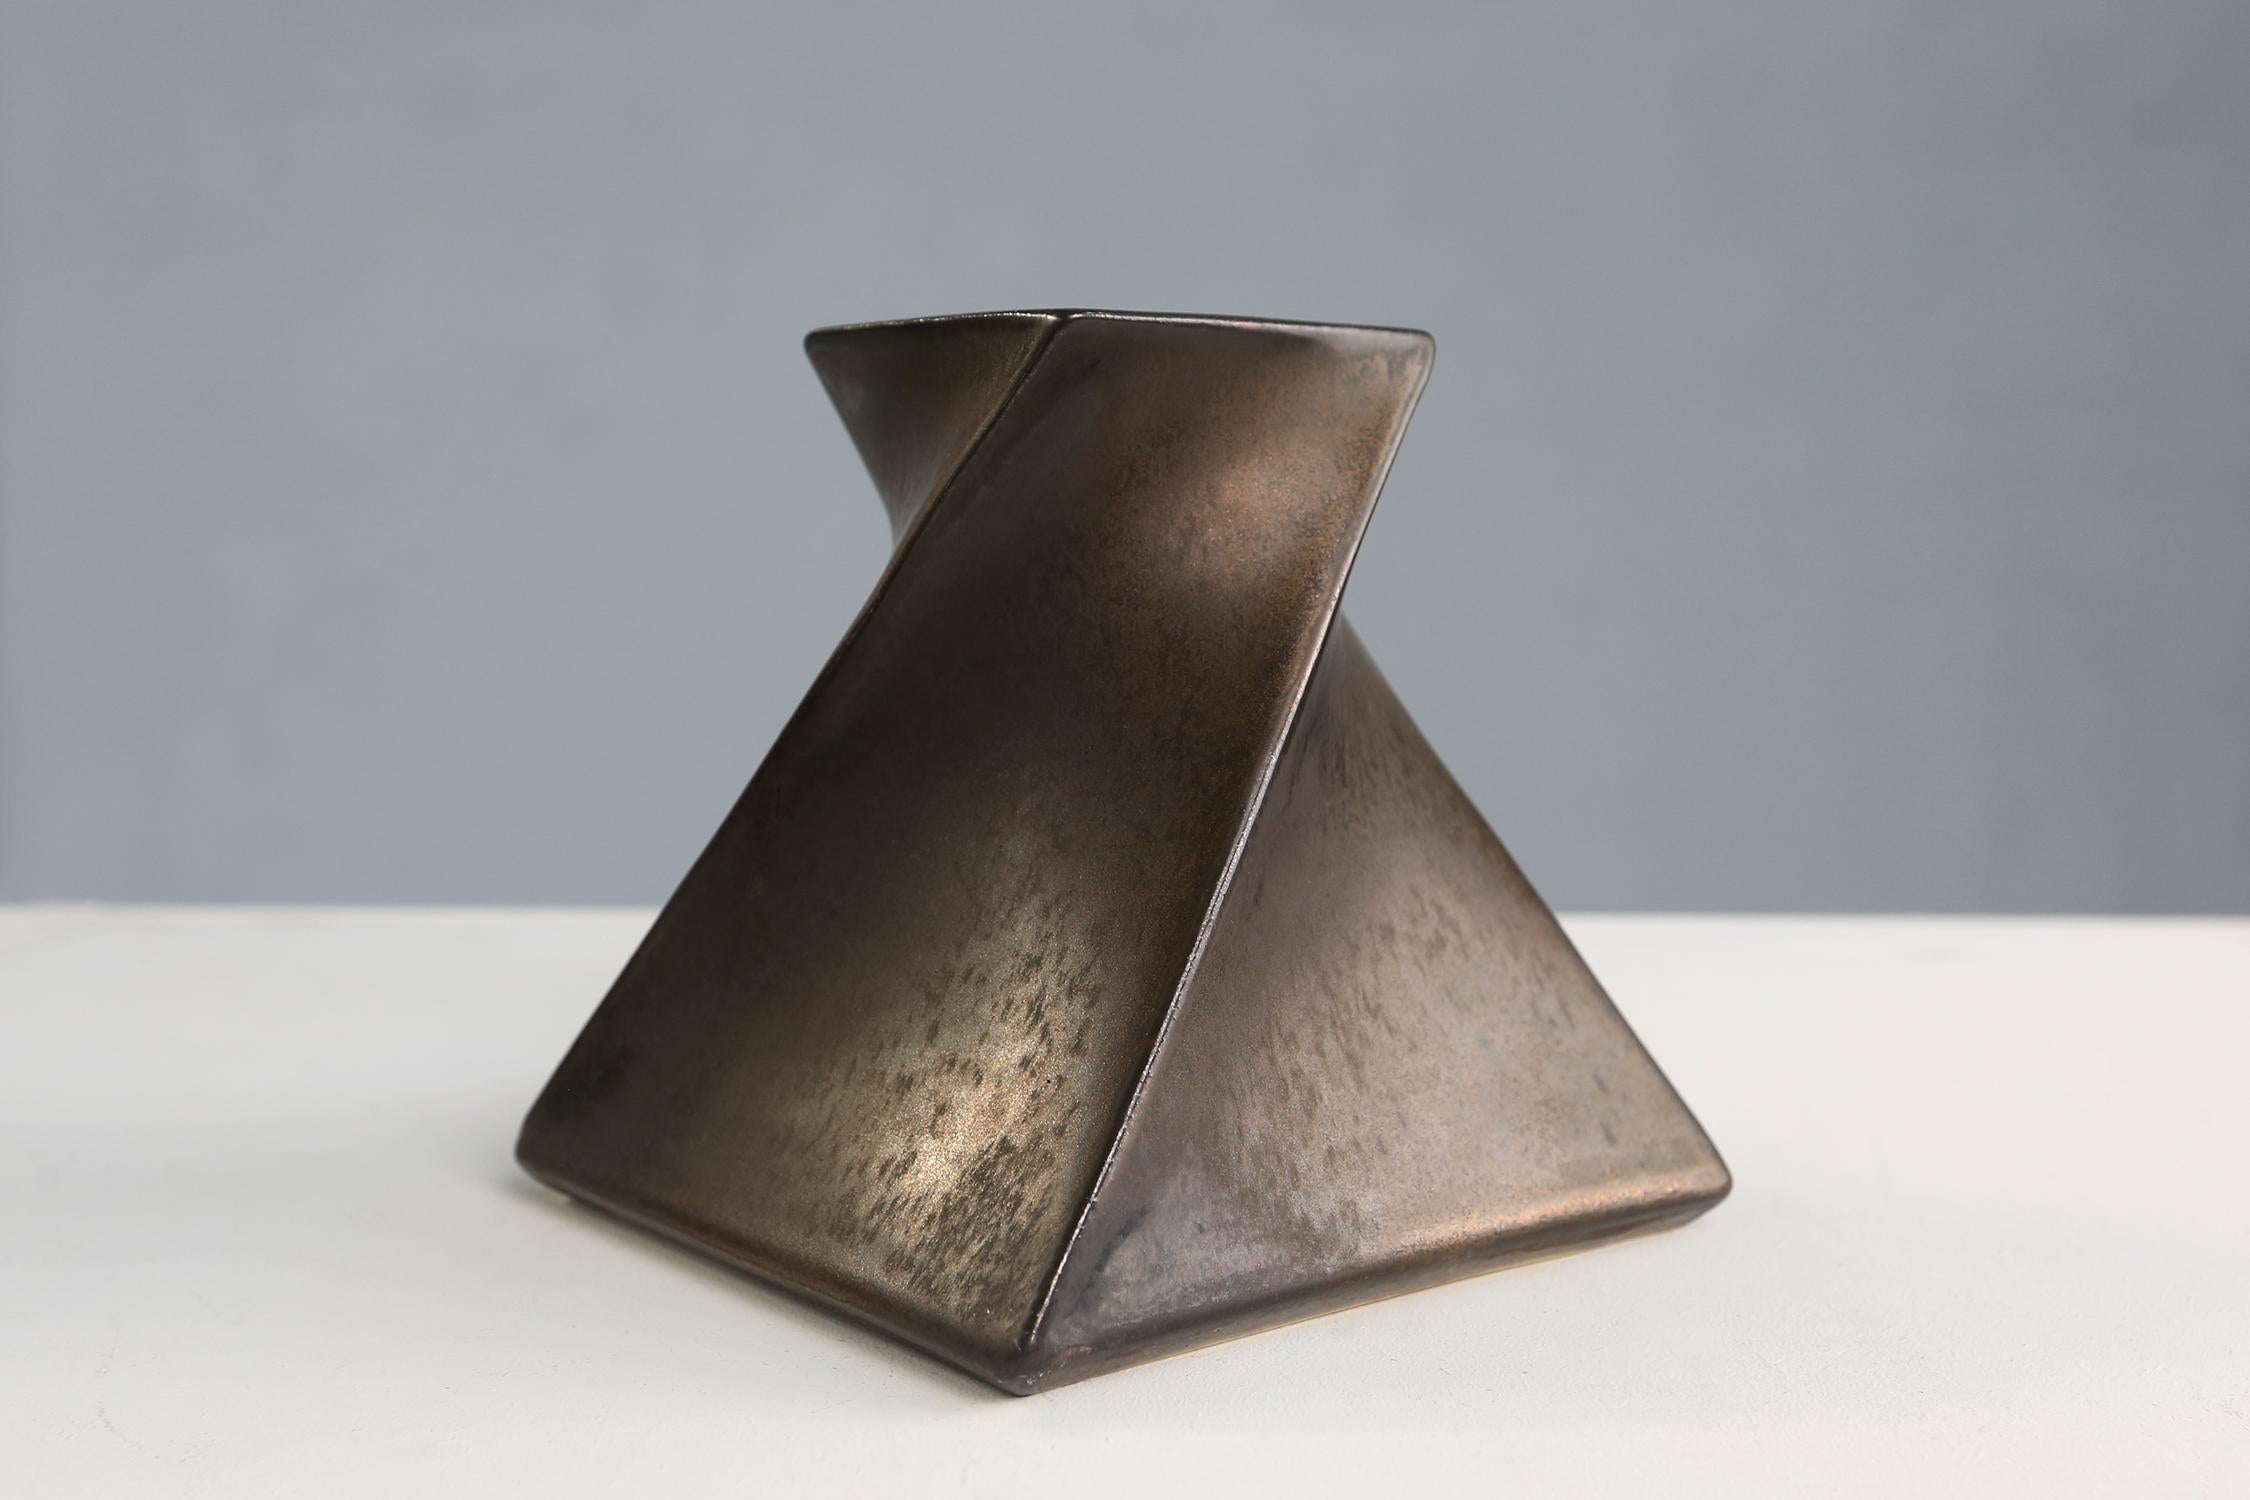 Bronze glazed ceramic geometric candle holder designed and made in the atelier of Jan van der Vaart, Holland 1978. This vase has a very nice bronze color glaze and nice geometric shape. This vase is made for tea lights.

The vase is signed at the